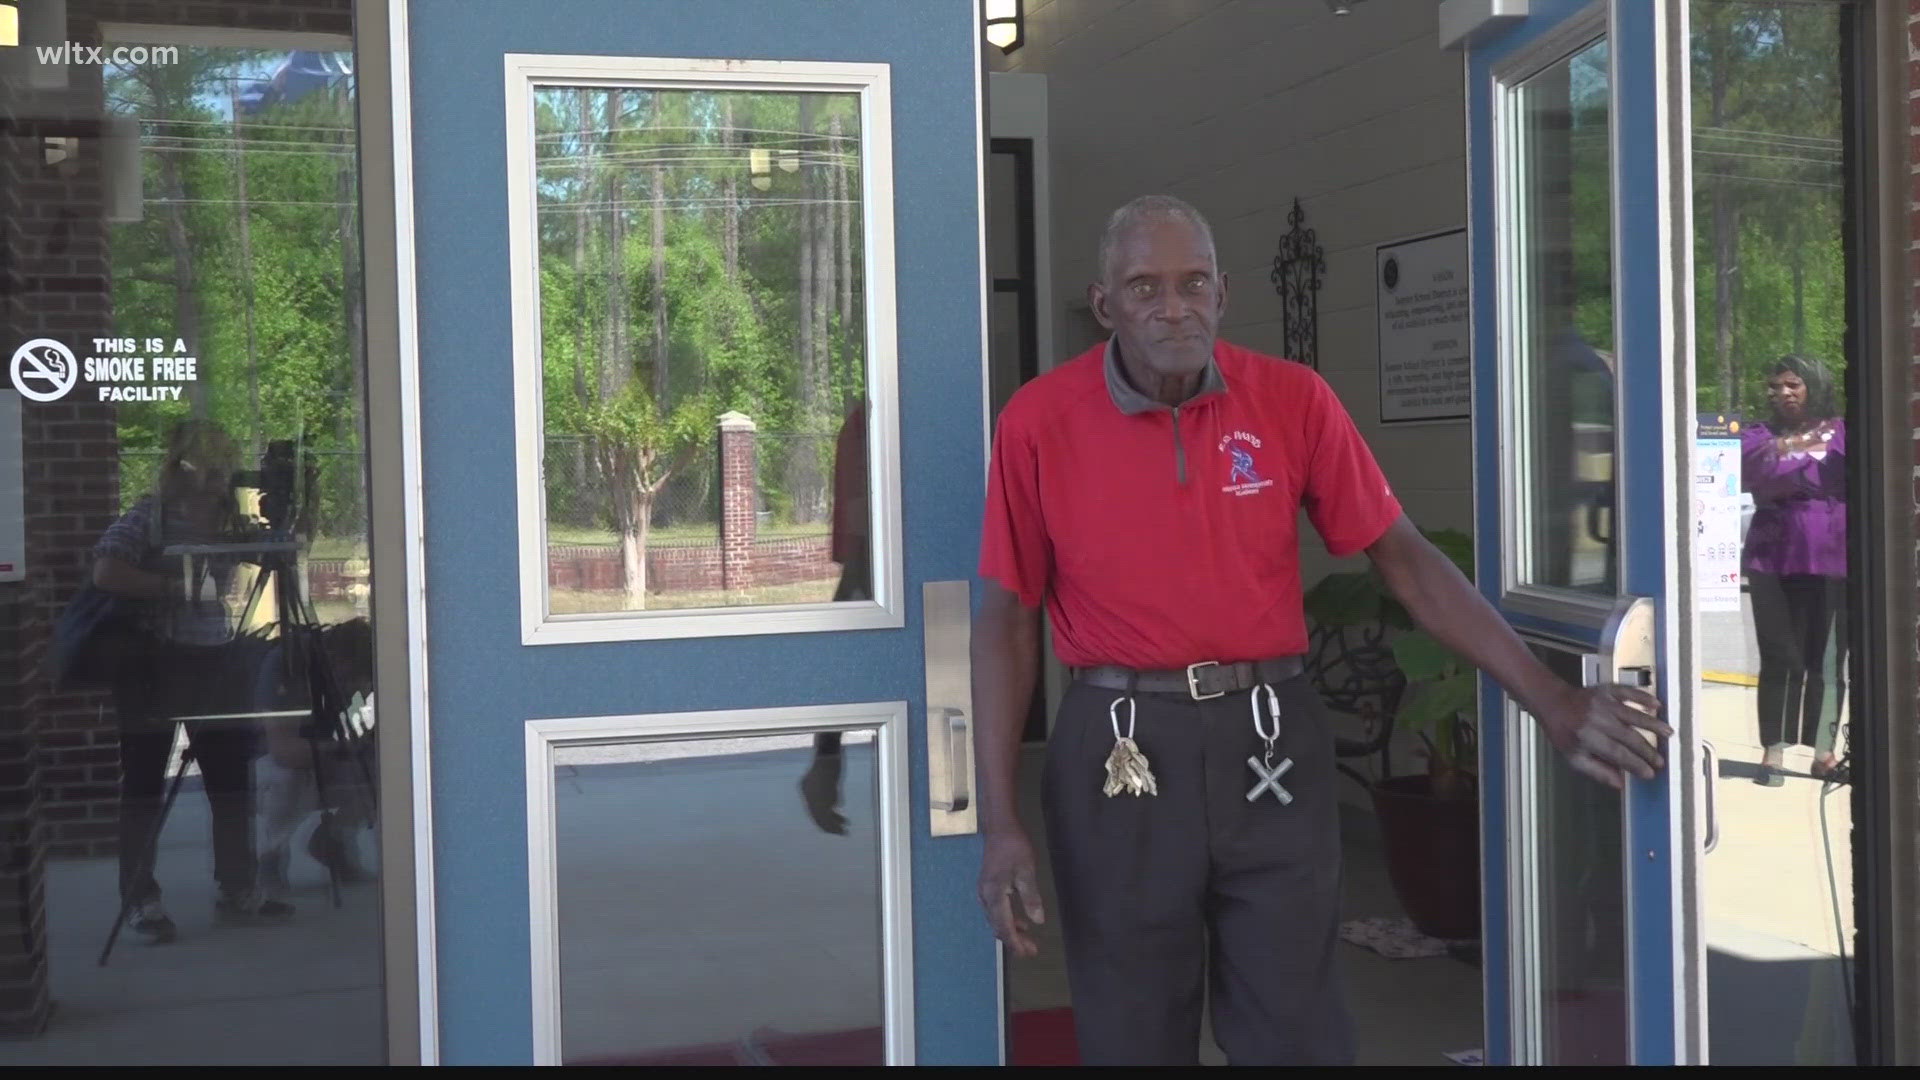 Fulton McFadden has been the groundskeeper at the Sumter School District for the past 60 years.